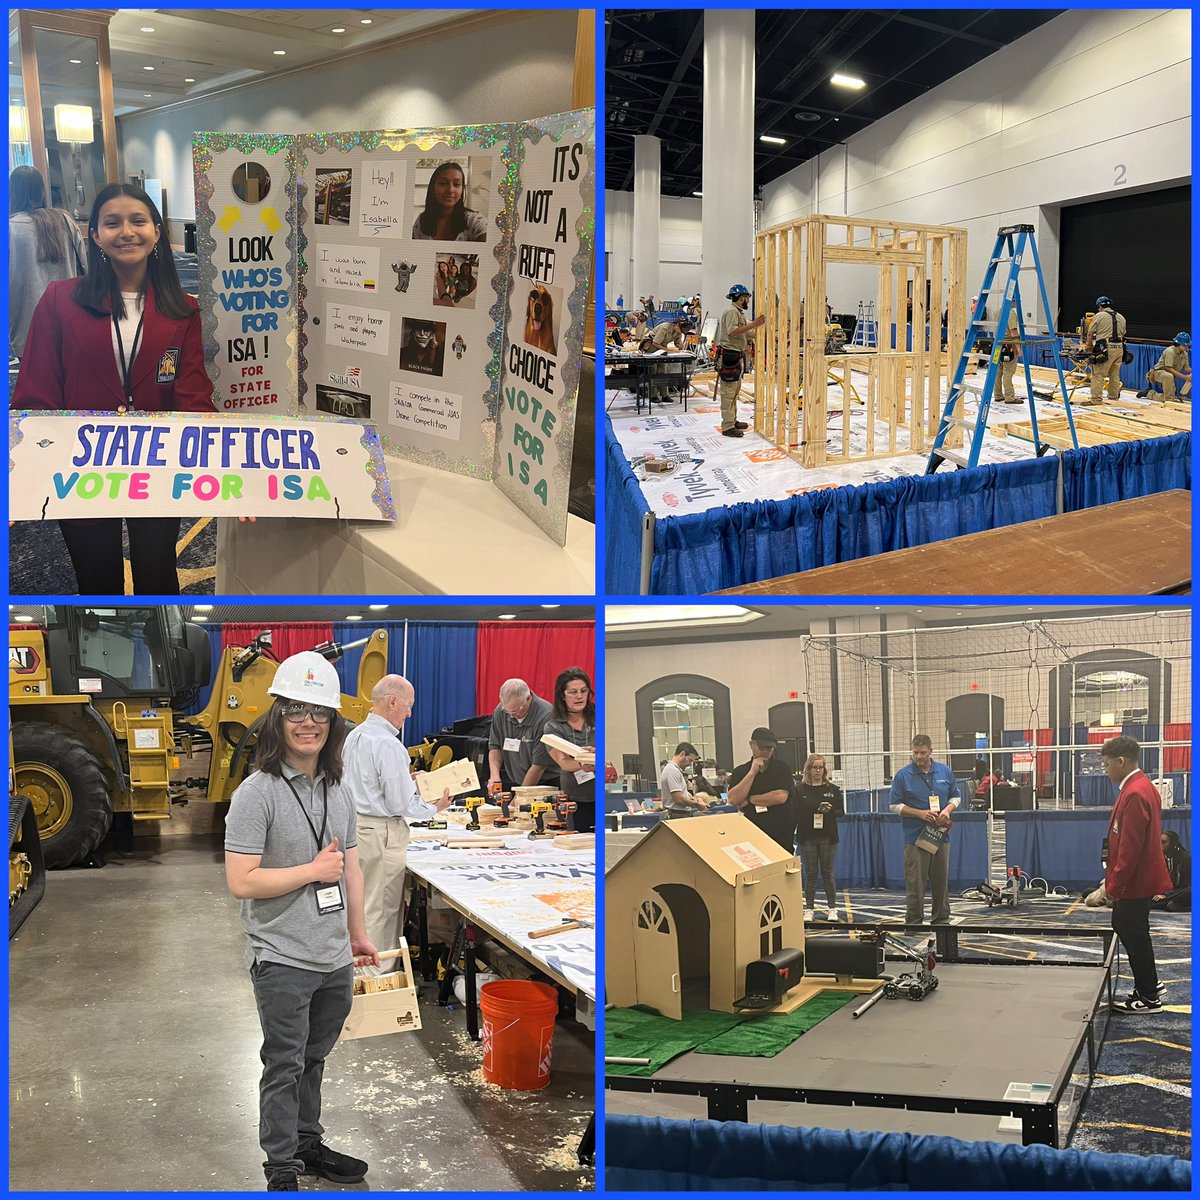 🎉 Day 1 at Skills USA was a huge success! 🌟 Congratulations to all the students who showcased their skills today. @BrowardCTE @msformoso @skillsusafl